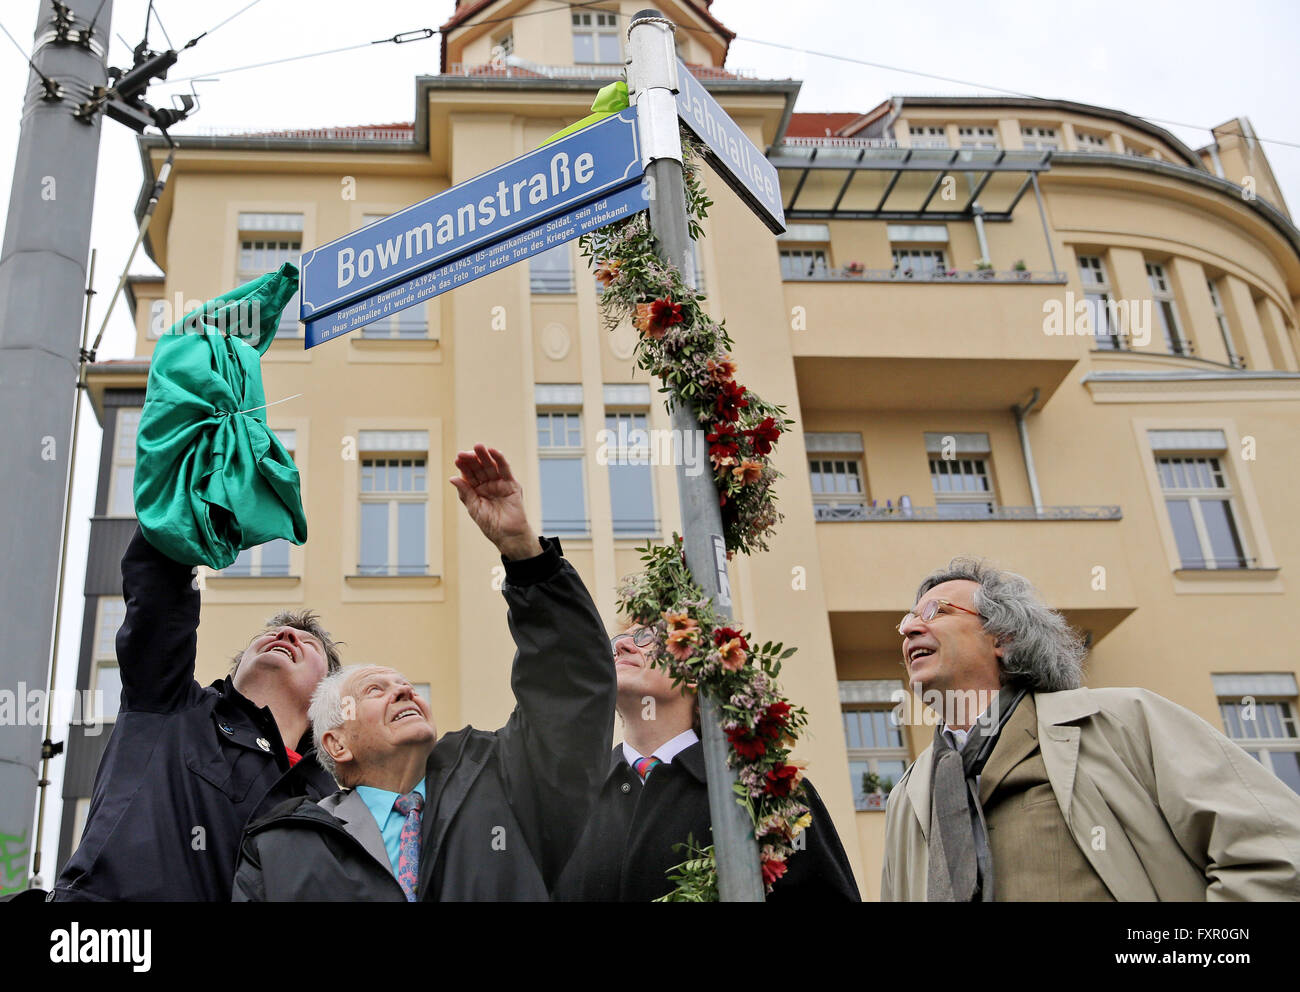 US veteran Lehman Riggs (C), comedian Meigl Hoffmann (L) and Leipzig's cultural mayor Michael Faber (R) unveil a sign for a street named after dead US soldier Bowman in front of the Capa House in Leipzig, Germany, 17 April 2016. The building, now also known as Capa House, became famous internationally through the picture 'Last man to die' by US war photographer Robert Capa. He documented how US soldier Raymond J. Bowman was shot dead on the second floor balcony on 18 April 1945 as US forces liberated Leipzig. The building was overhauled after years of decay, with an exhibition now showcasing t Stock Photo